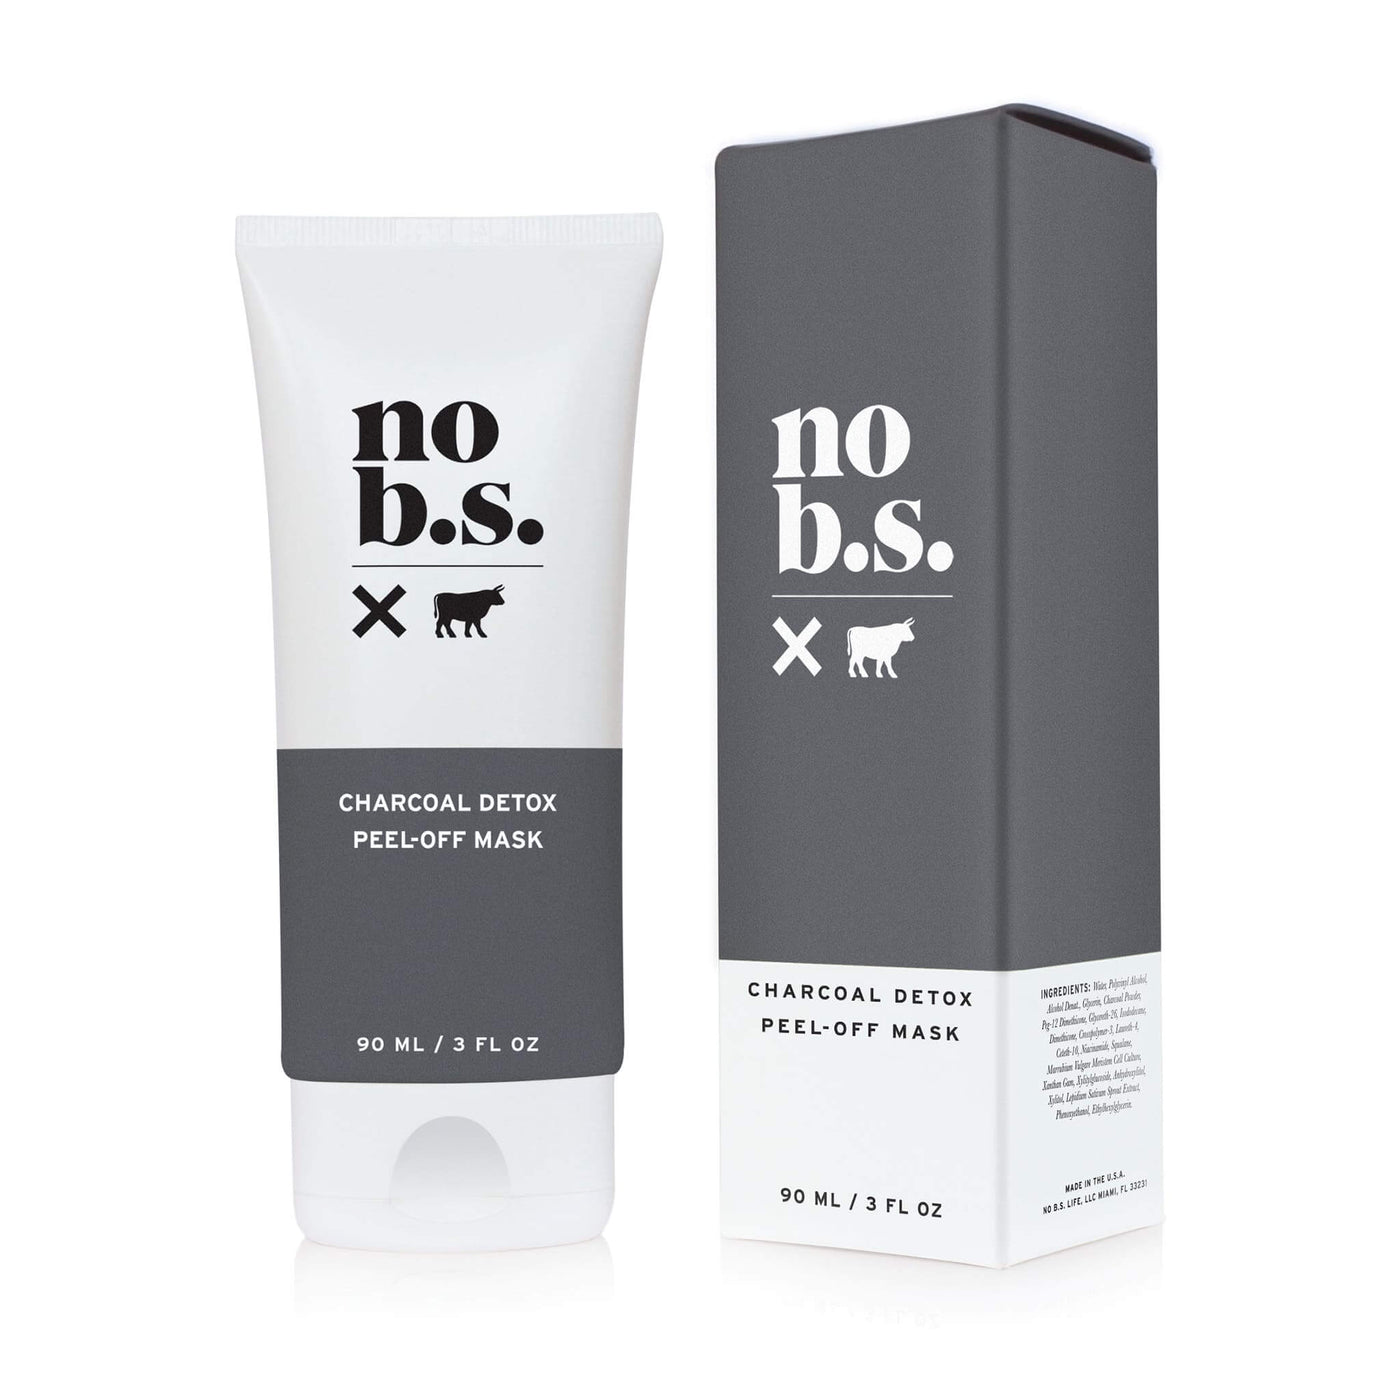 No BS Charcoal Detox Peel-Off Mask bottle and box front